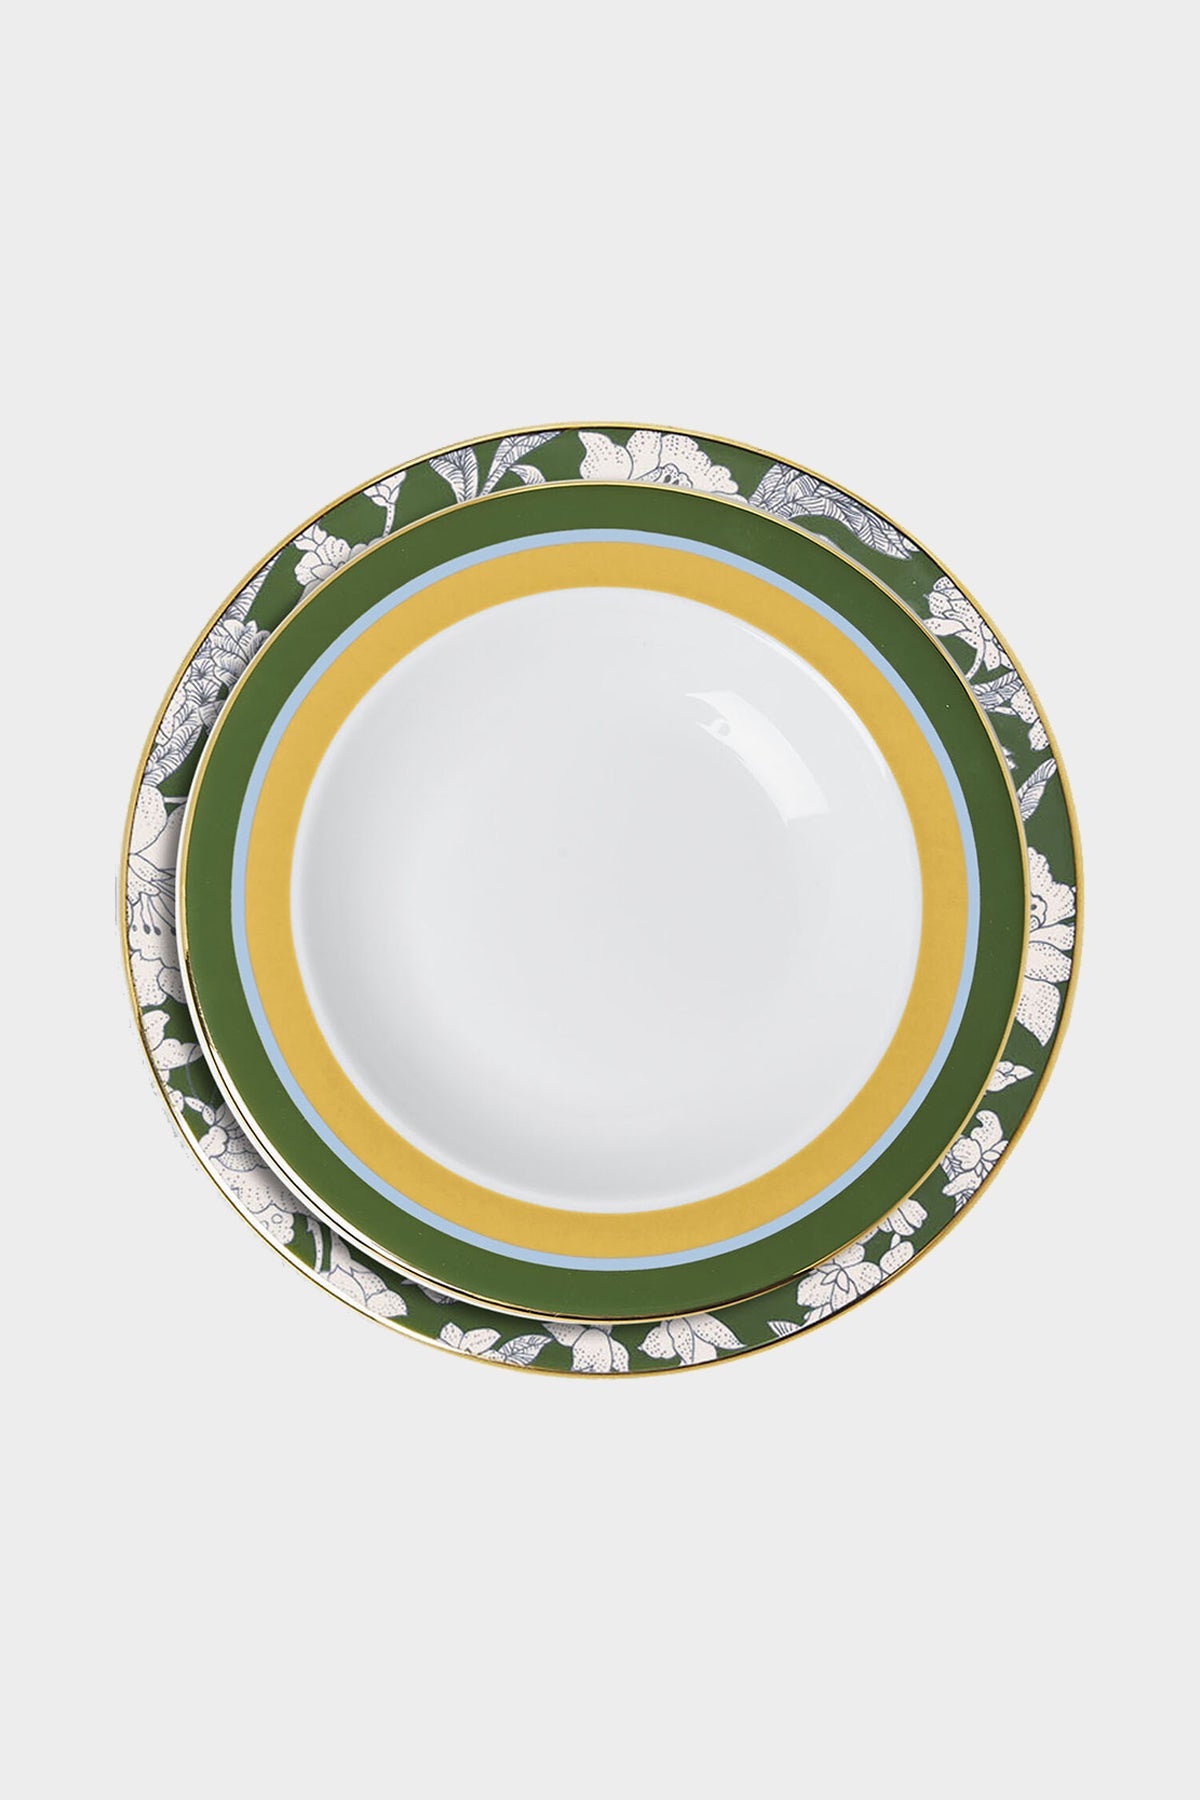 Soup and Dinner Plate Set of 2 in Roman Holiday Avorio - shop-olivia.com